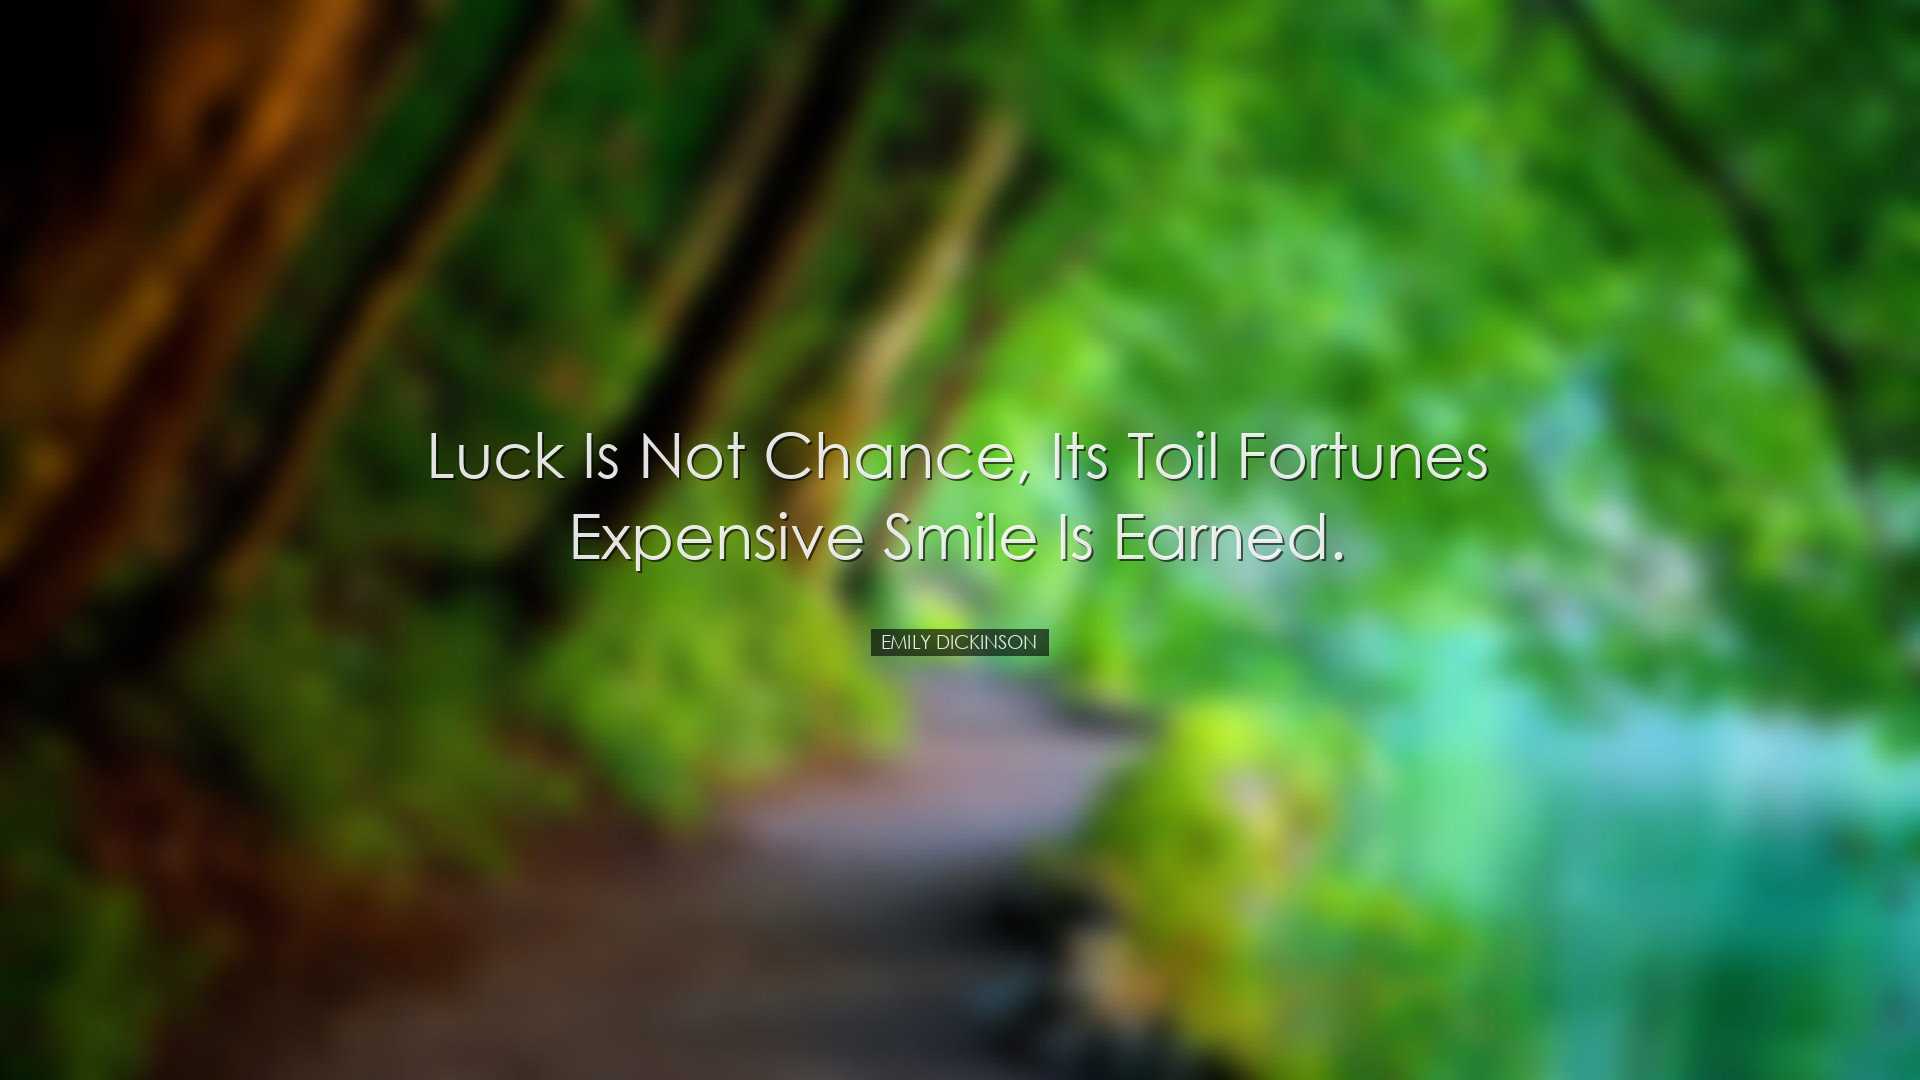 Luck is not chance, its toil fortunes expensive smile is earned. -